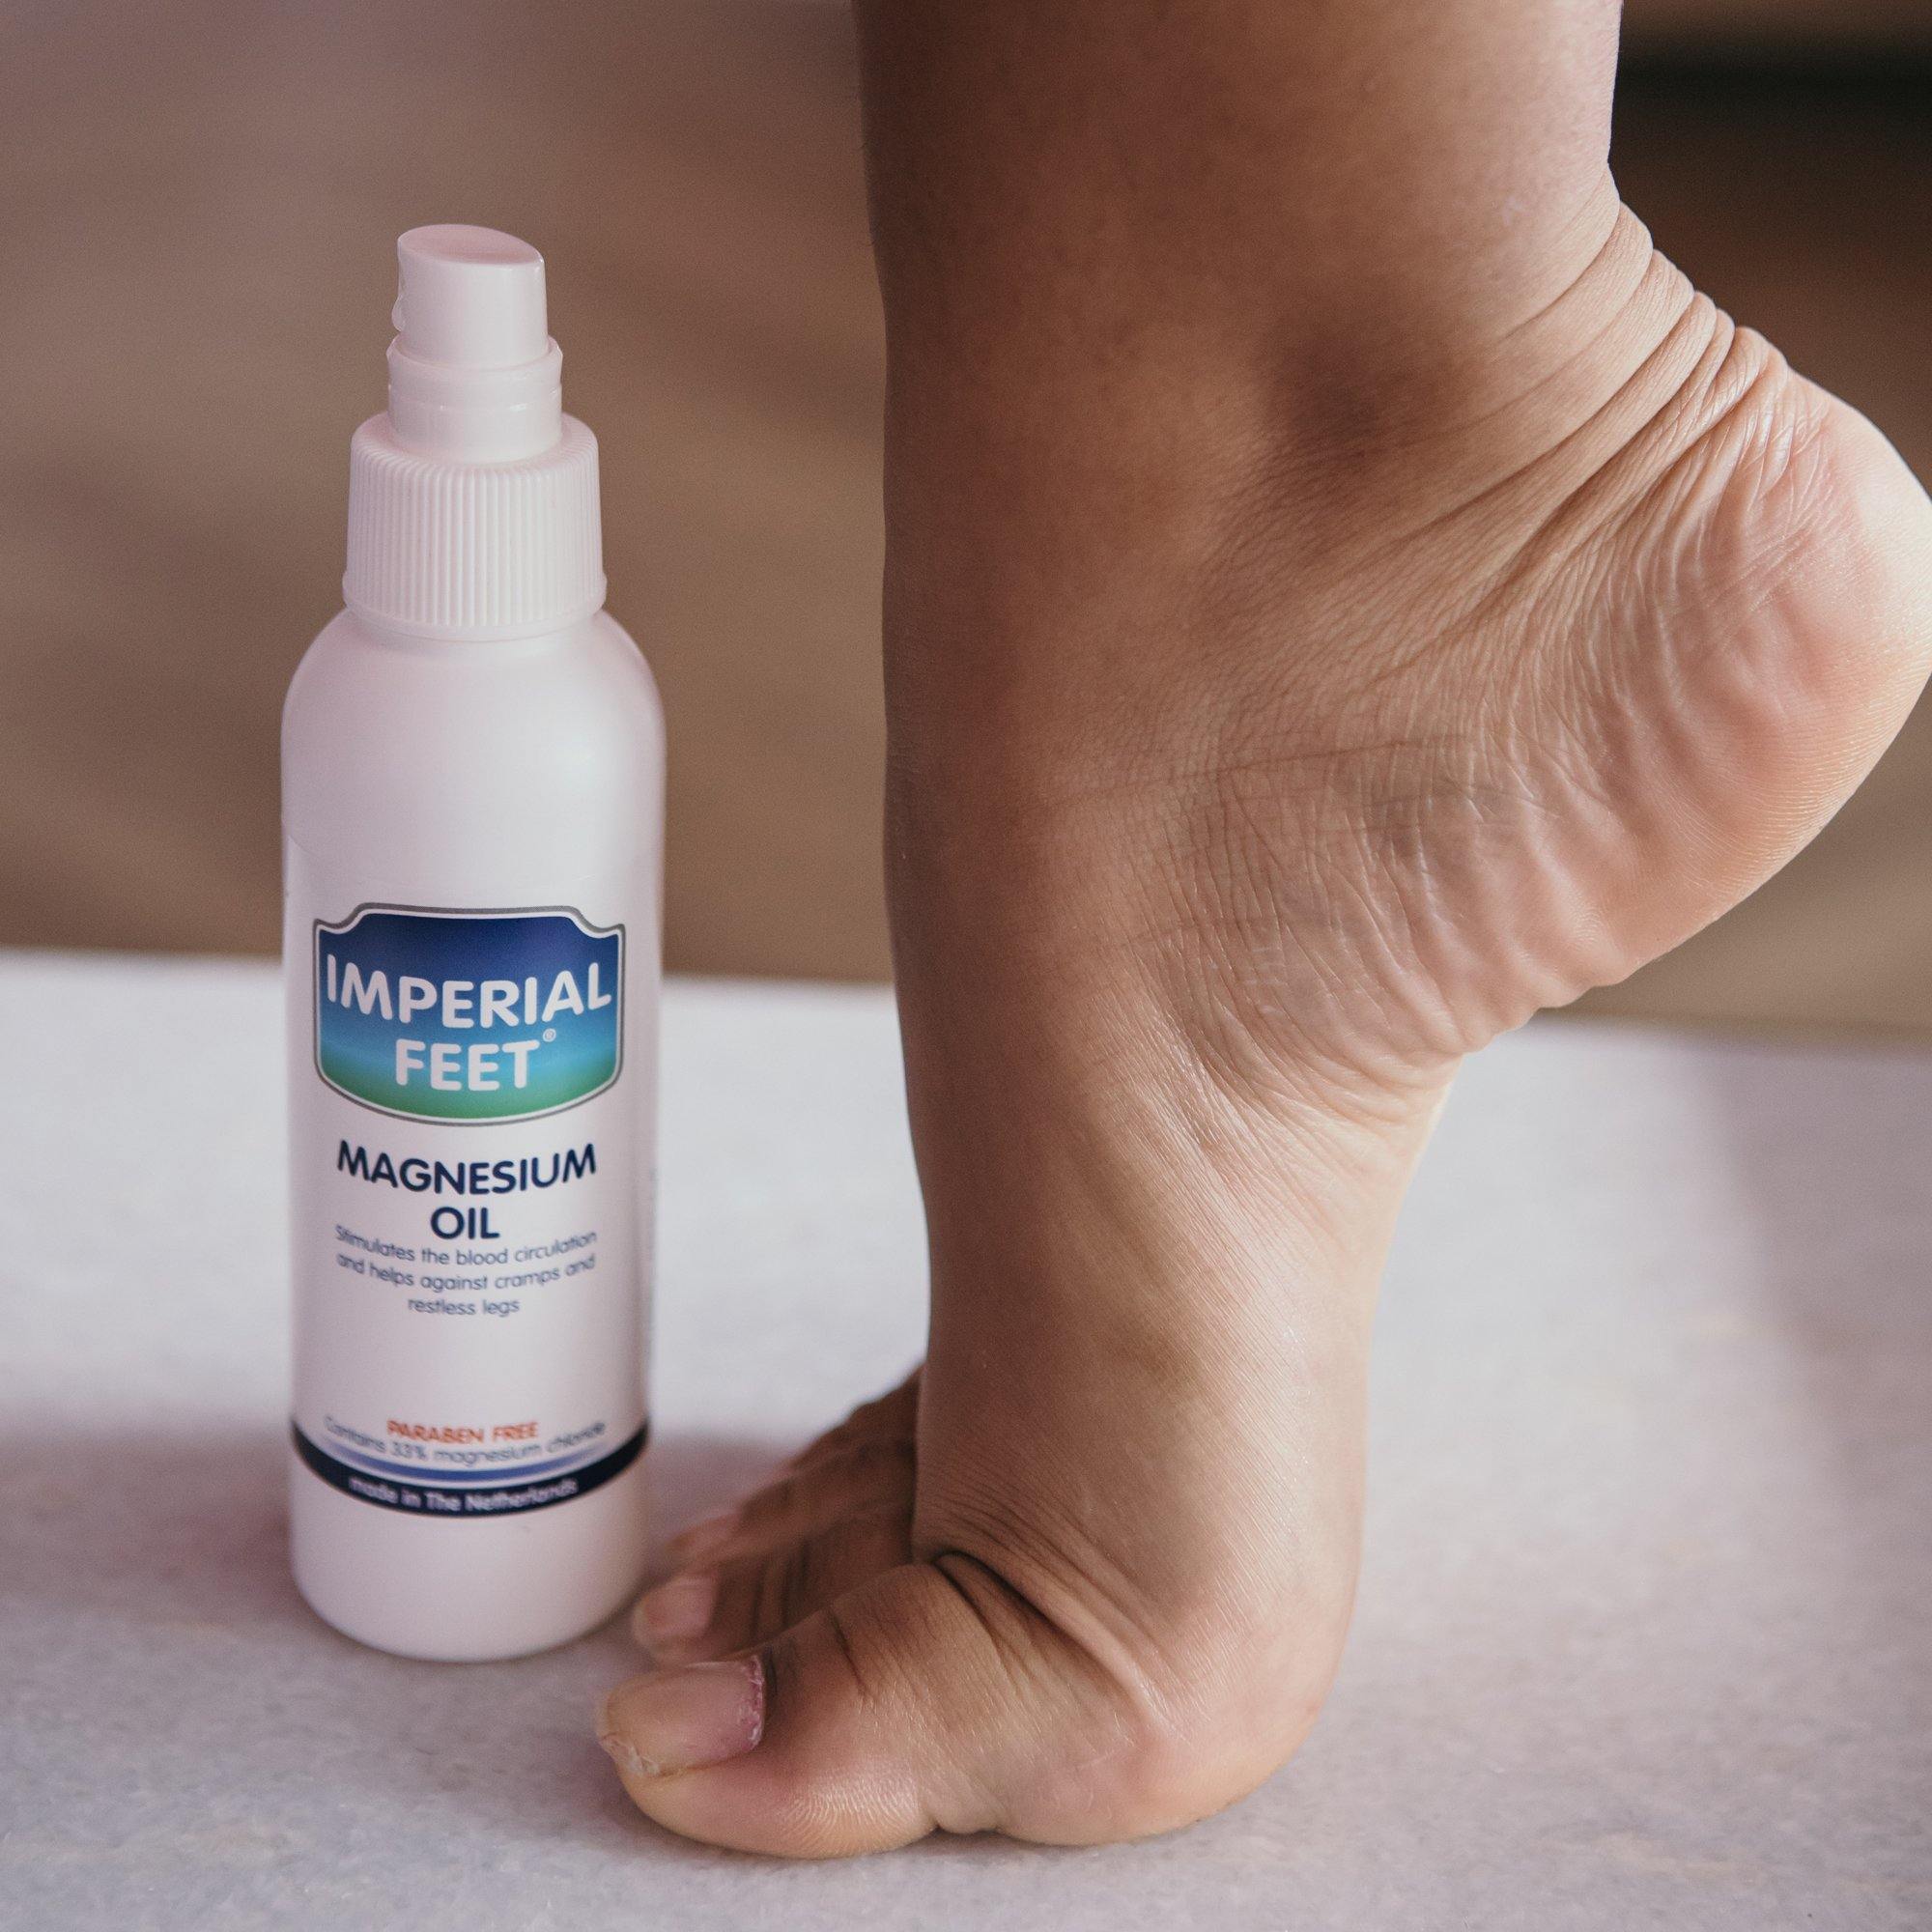 Magnesium Oil - Imperial Feet - Foot care products - B2C, Extra Care